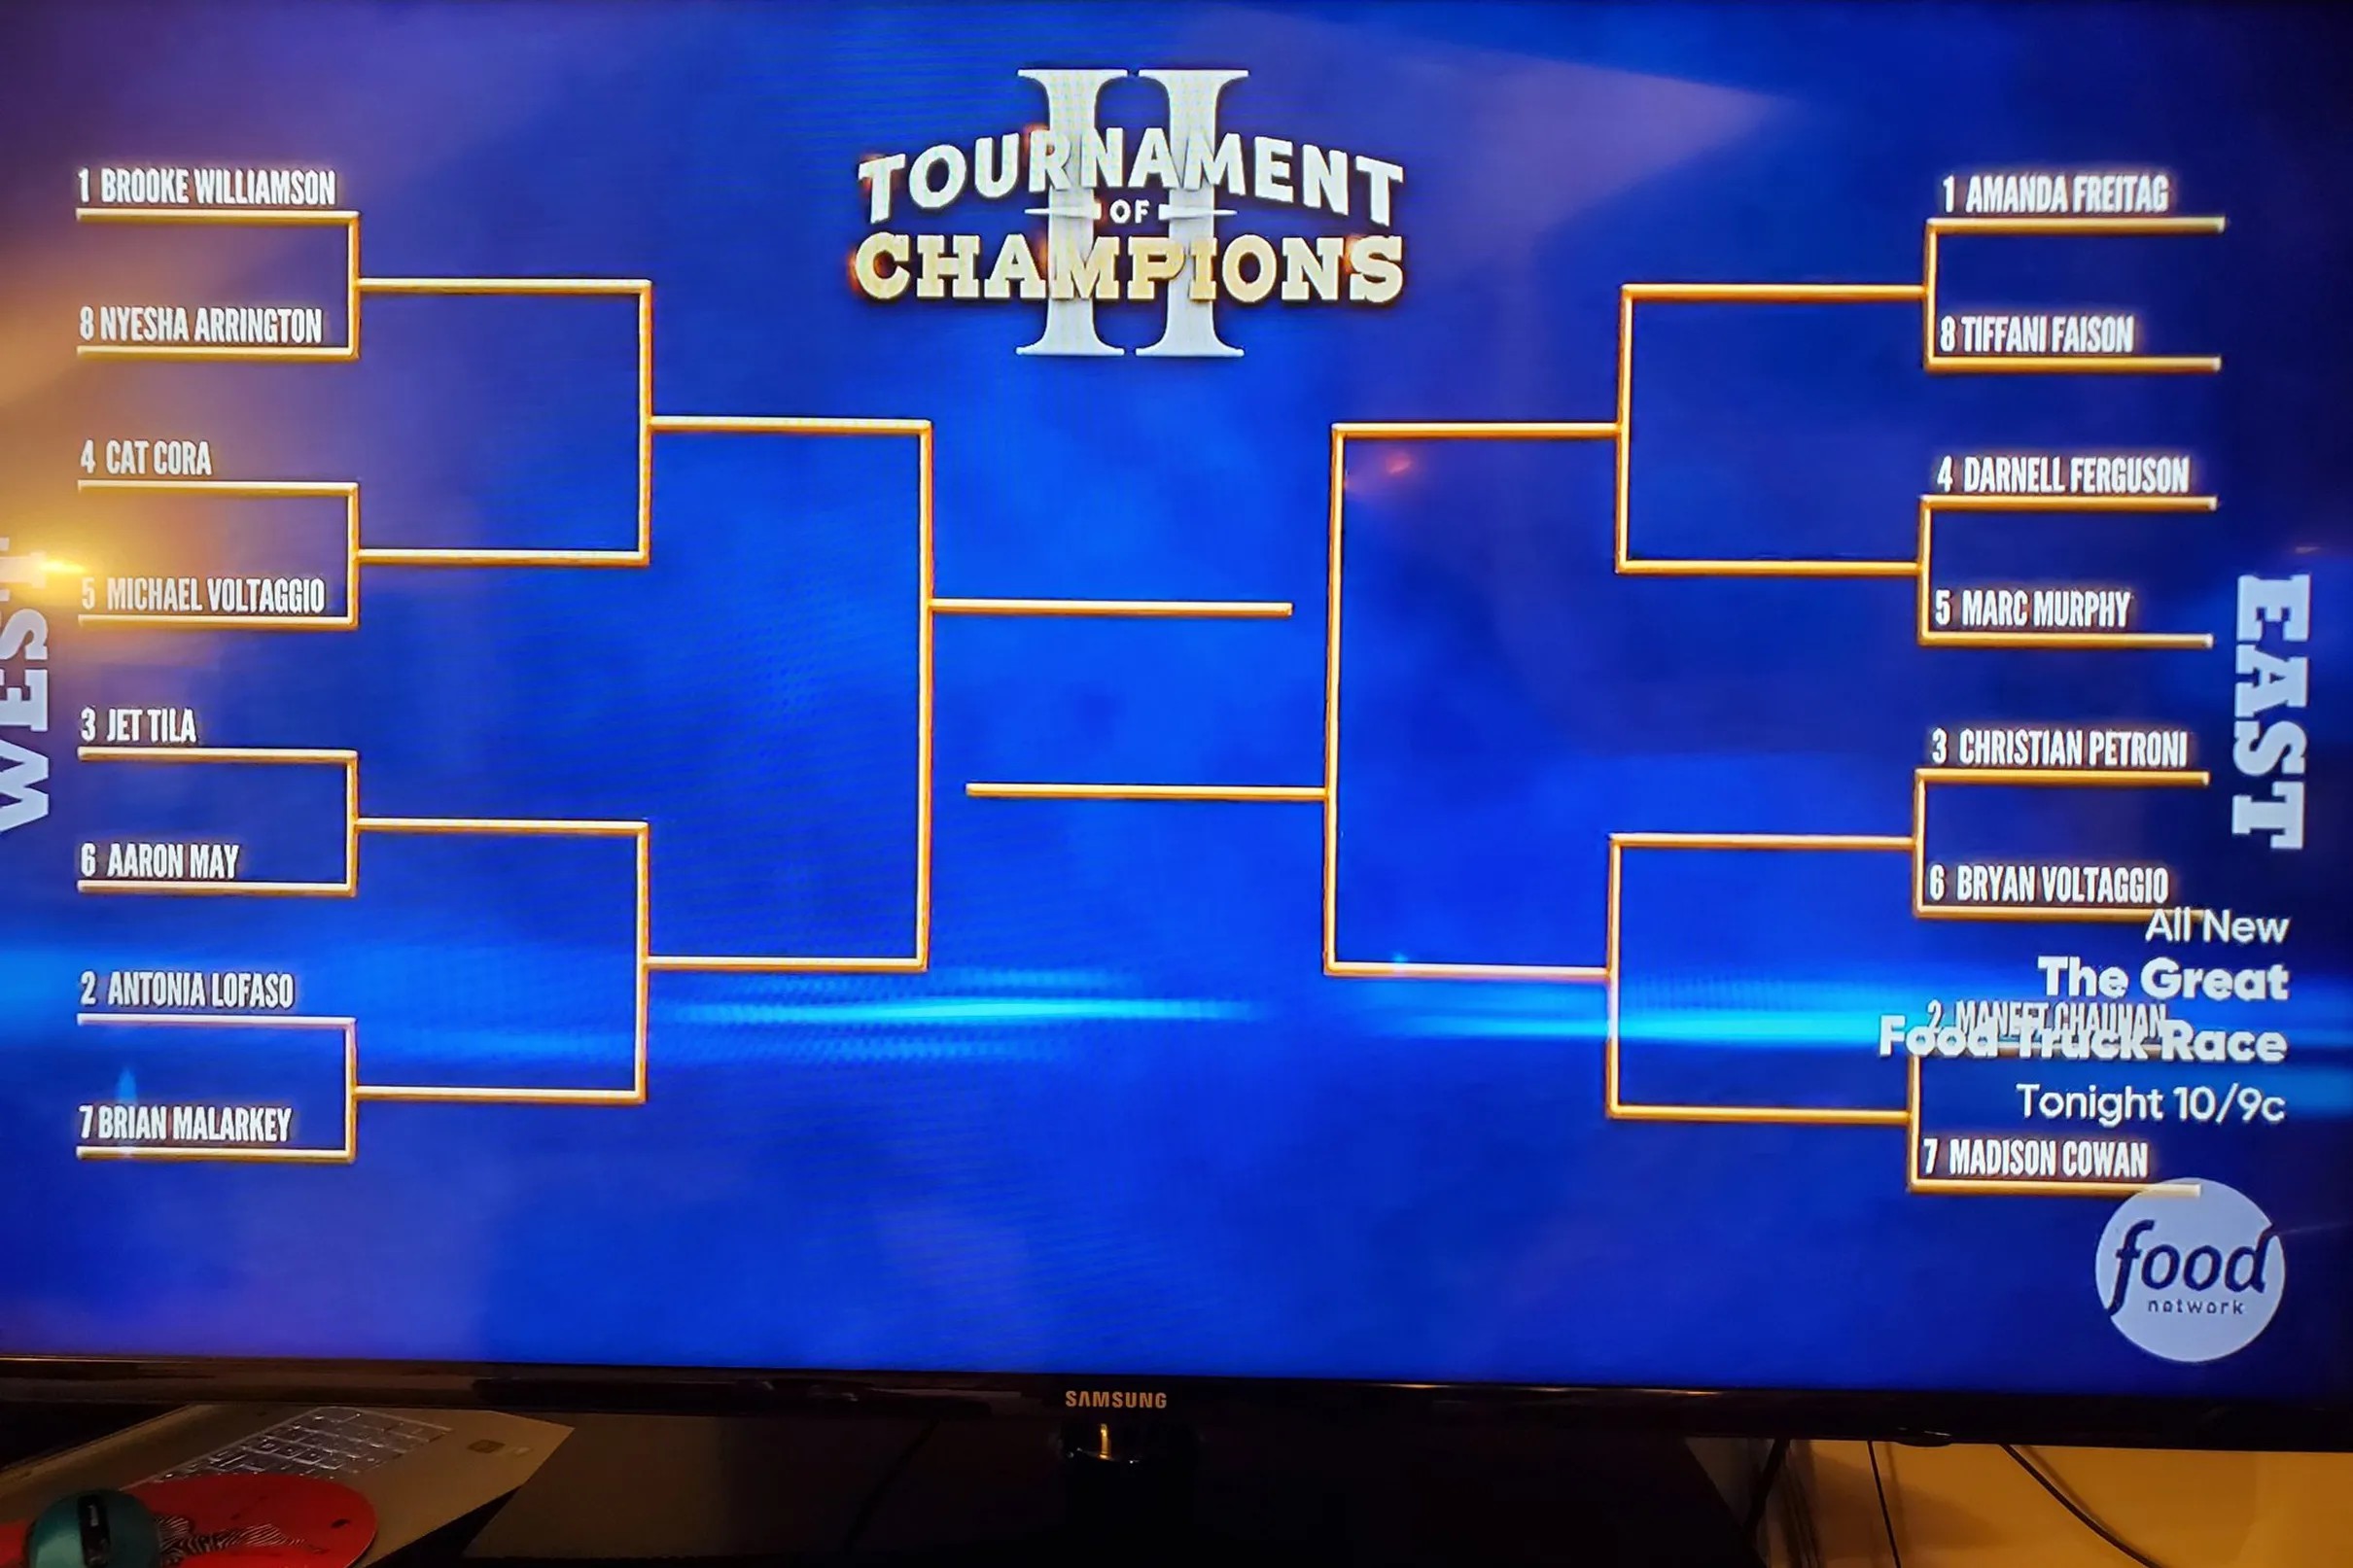 TOURNAMENT OF CHAMPIONS: And it’s on to the Elite Eight